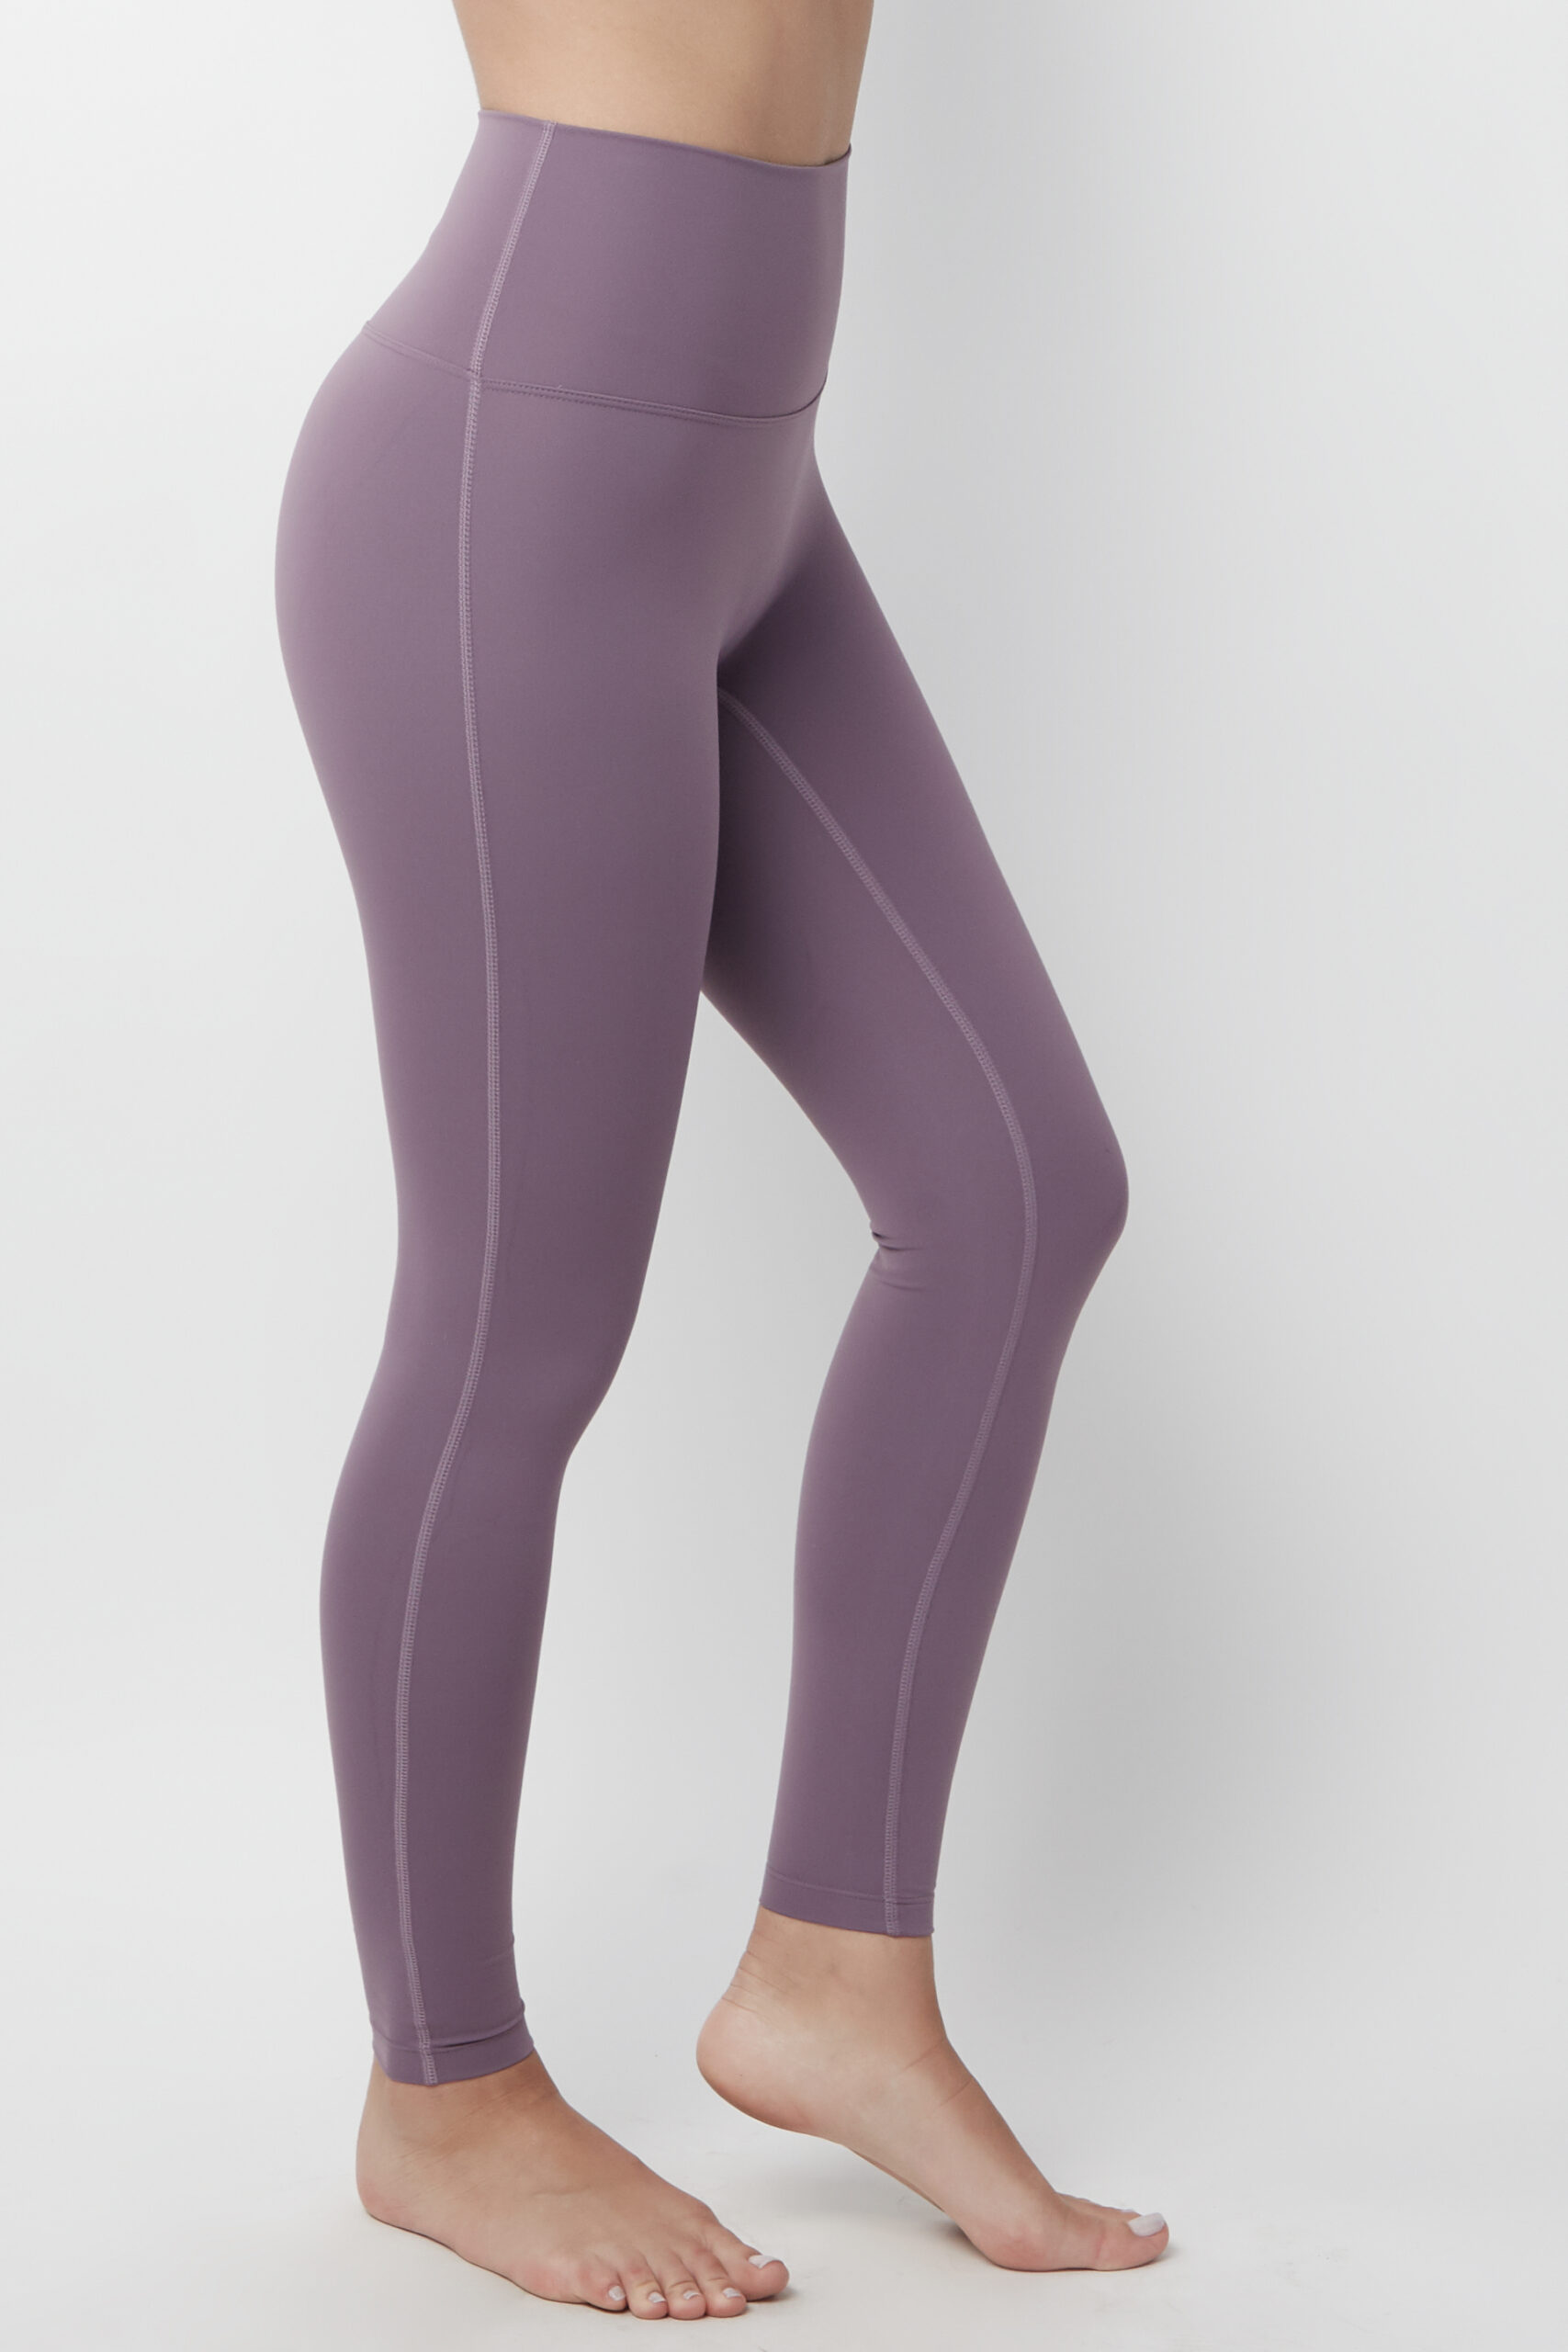 The Best Leggings for Working Out: A Comprehensive Guide t